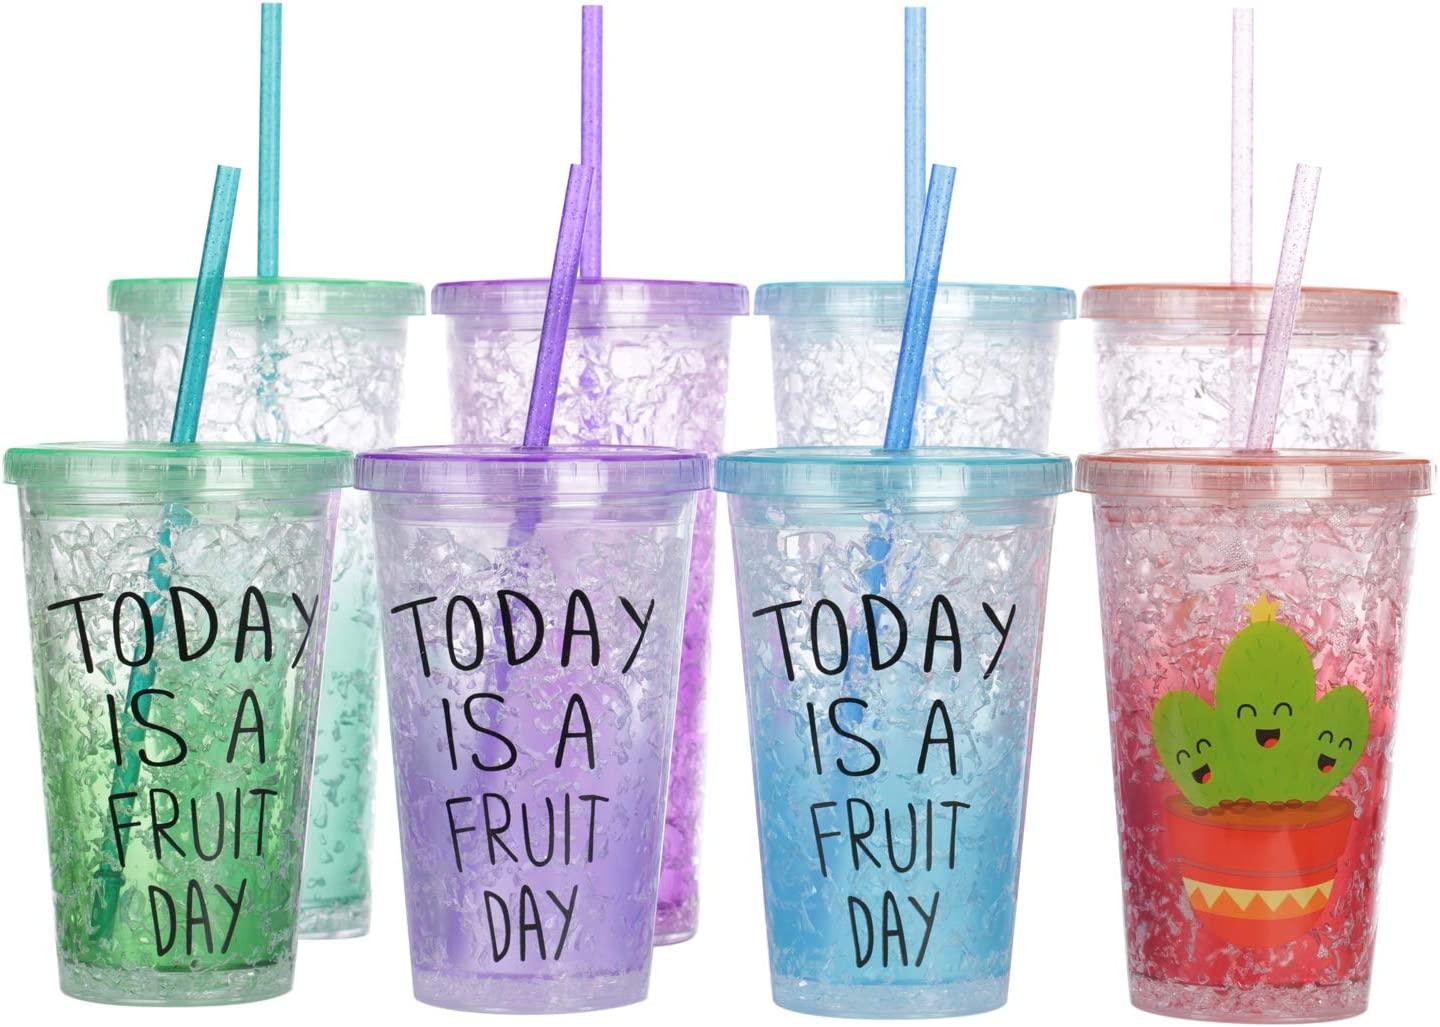 11 Glitter Colored Reusable Hard Plastic Straws - Perfect For